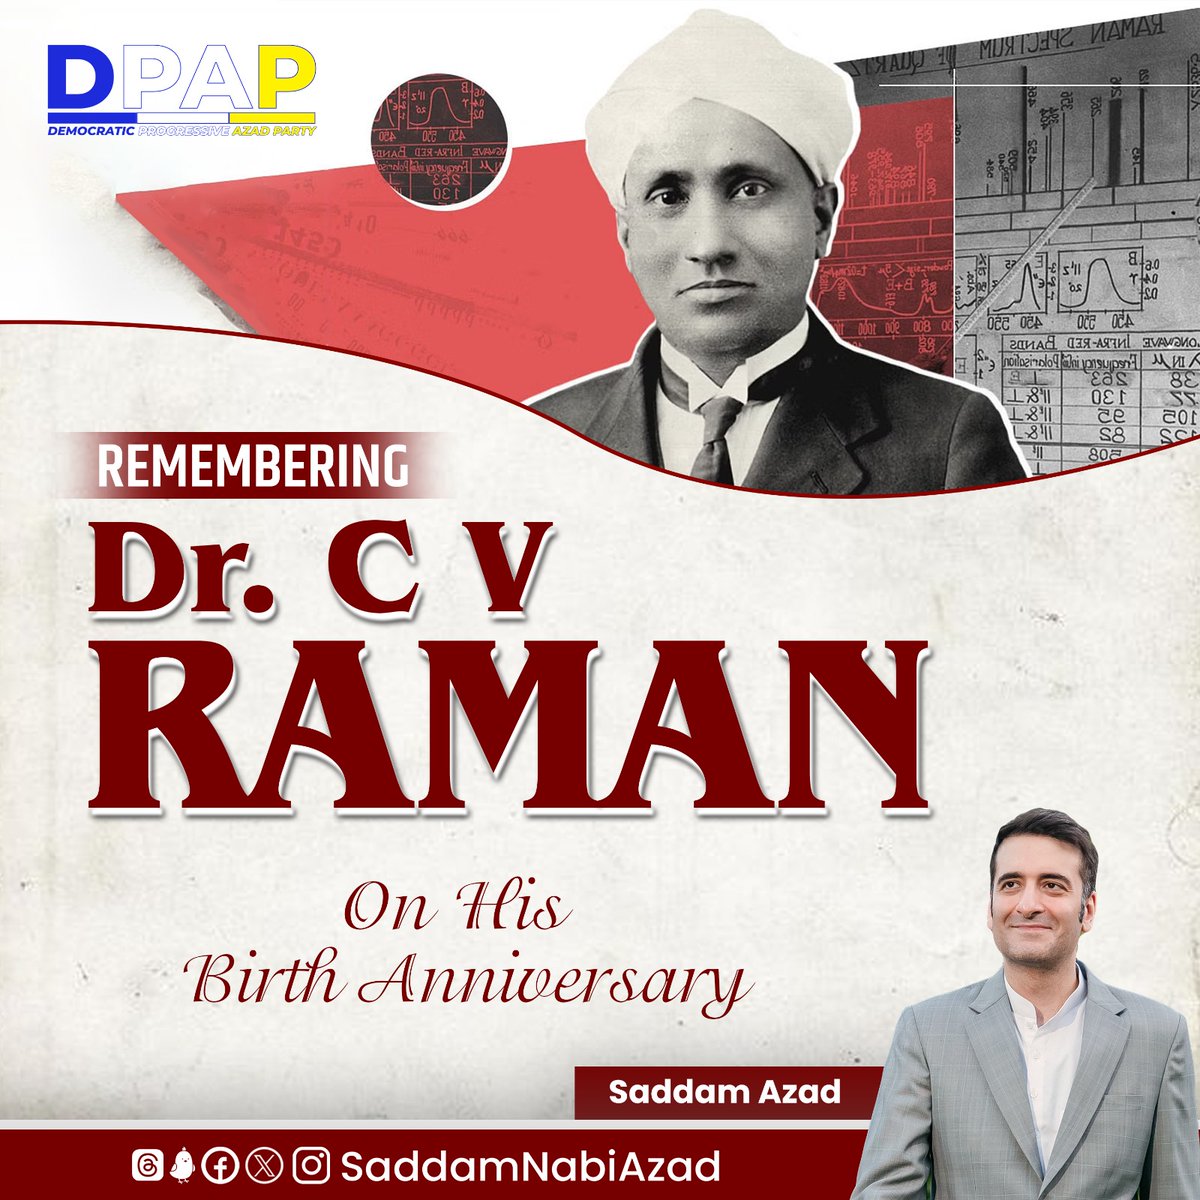 Honoring the legacy of Dr. C V Raman on his birth anniversary. His work in #physics, notably the discovery of the #RamanEffect, earned him the #NobelPrize and forever changed the landscape of #scientific understanding. His dedication to scientific excellence has inspired…